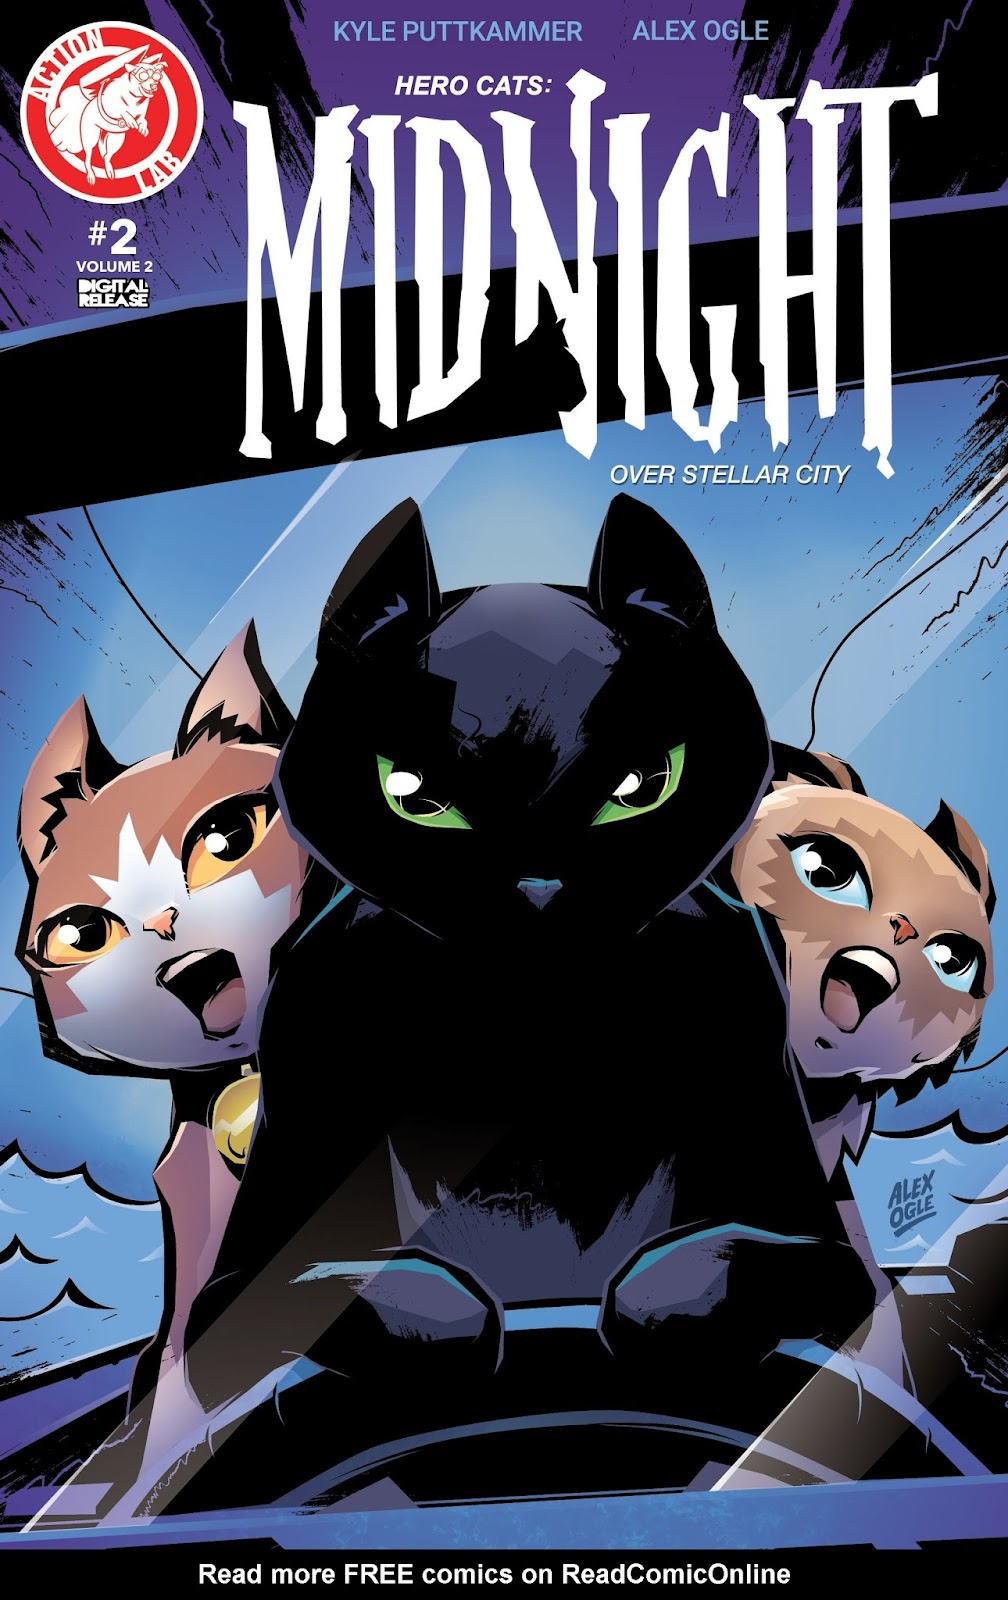 Hero Cats: Midnight Over Stellar City Vol. 2 issue 2 - Page 1